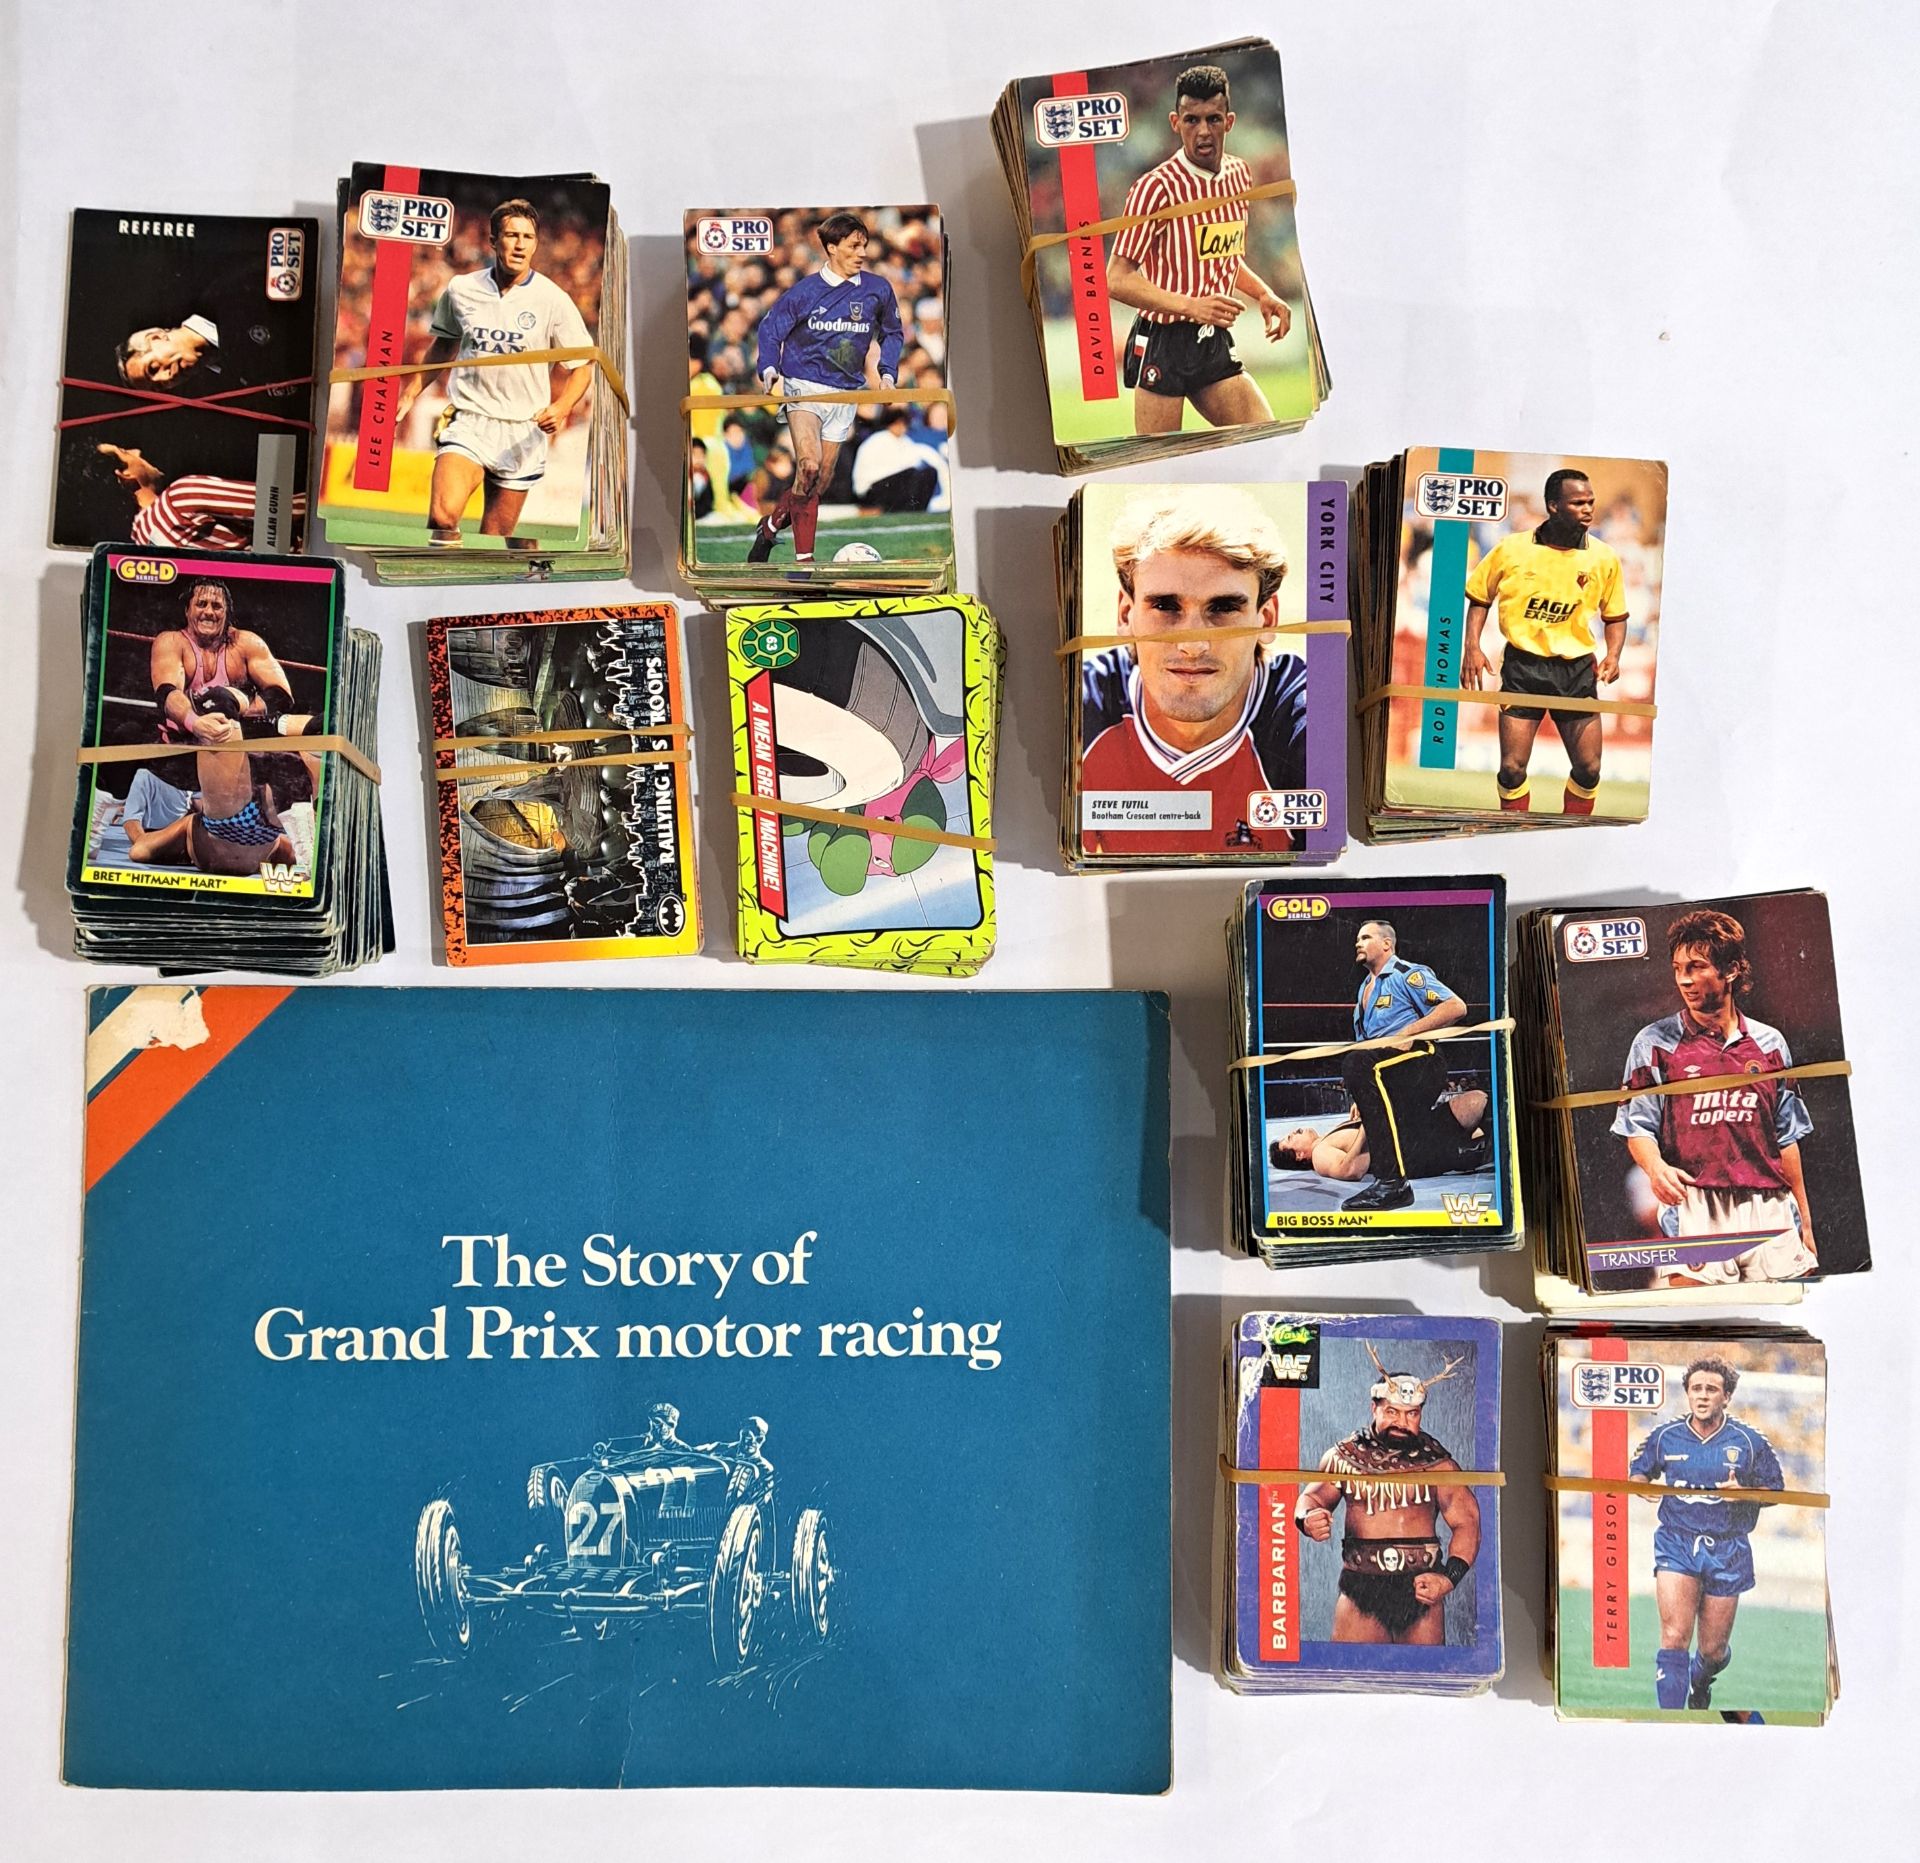 Sports/TV related trading cards to include Pro Set Footballers